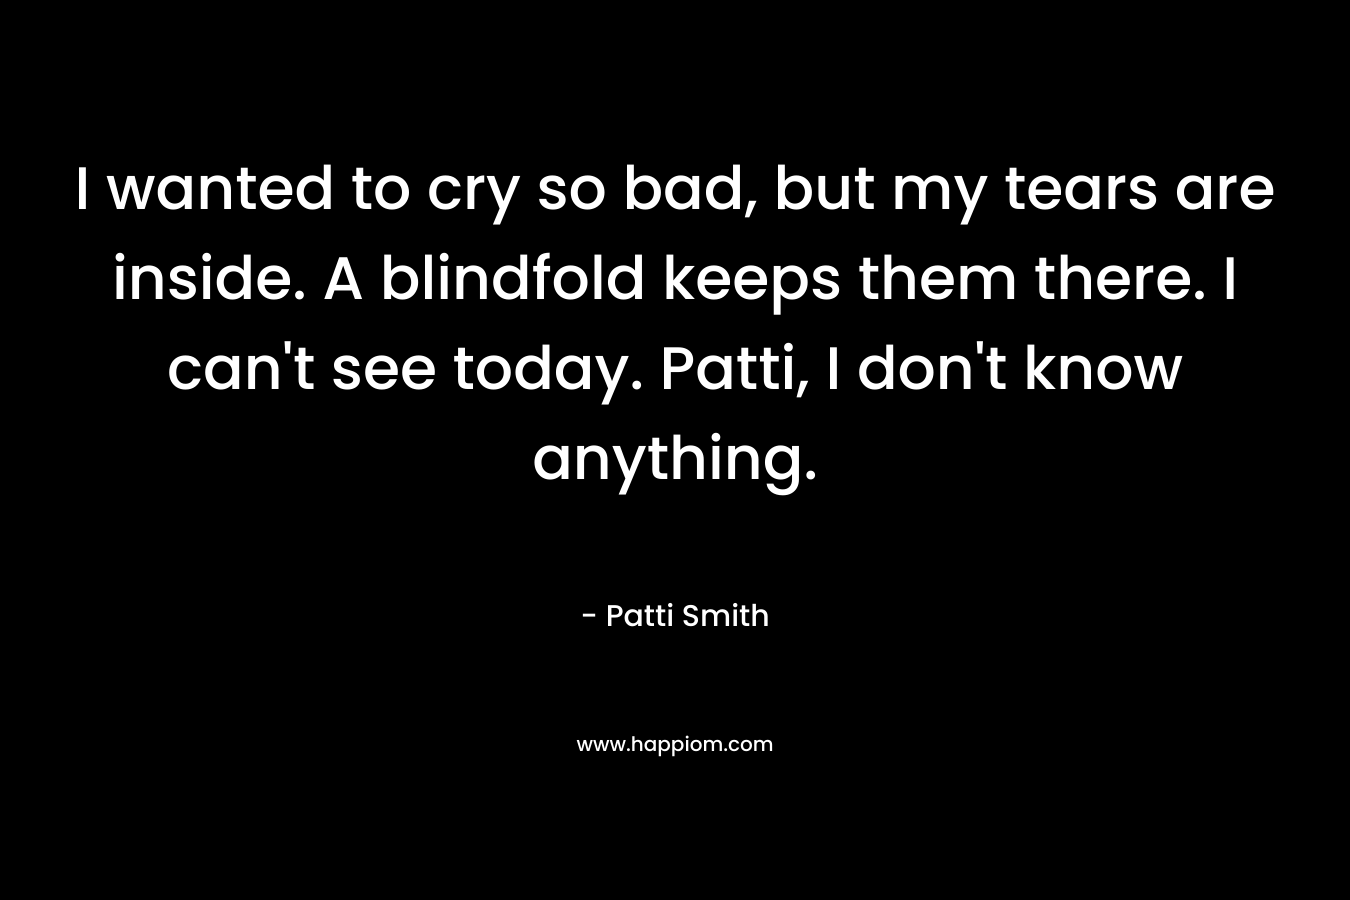 I wanted to cry so bad, but my tears are inside. A blindfold keeps them there. I can't see today. Patti, I don't know anything.